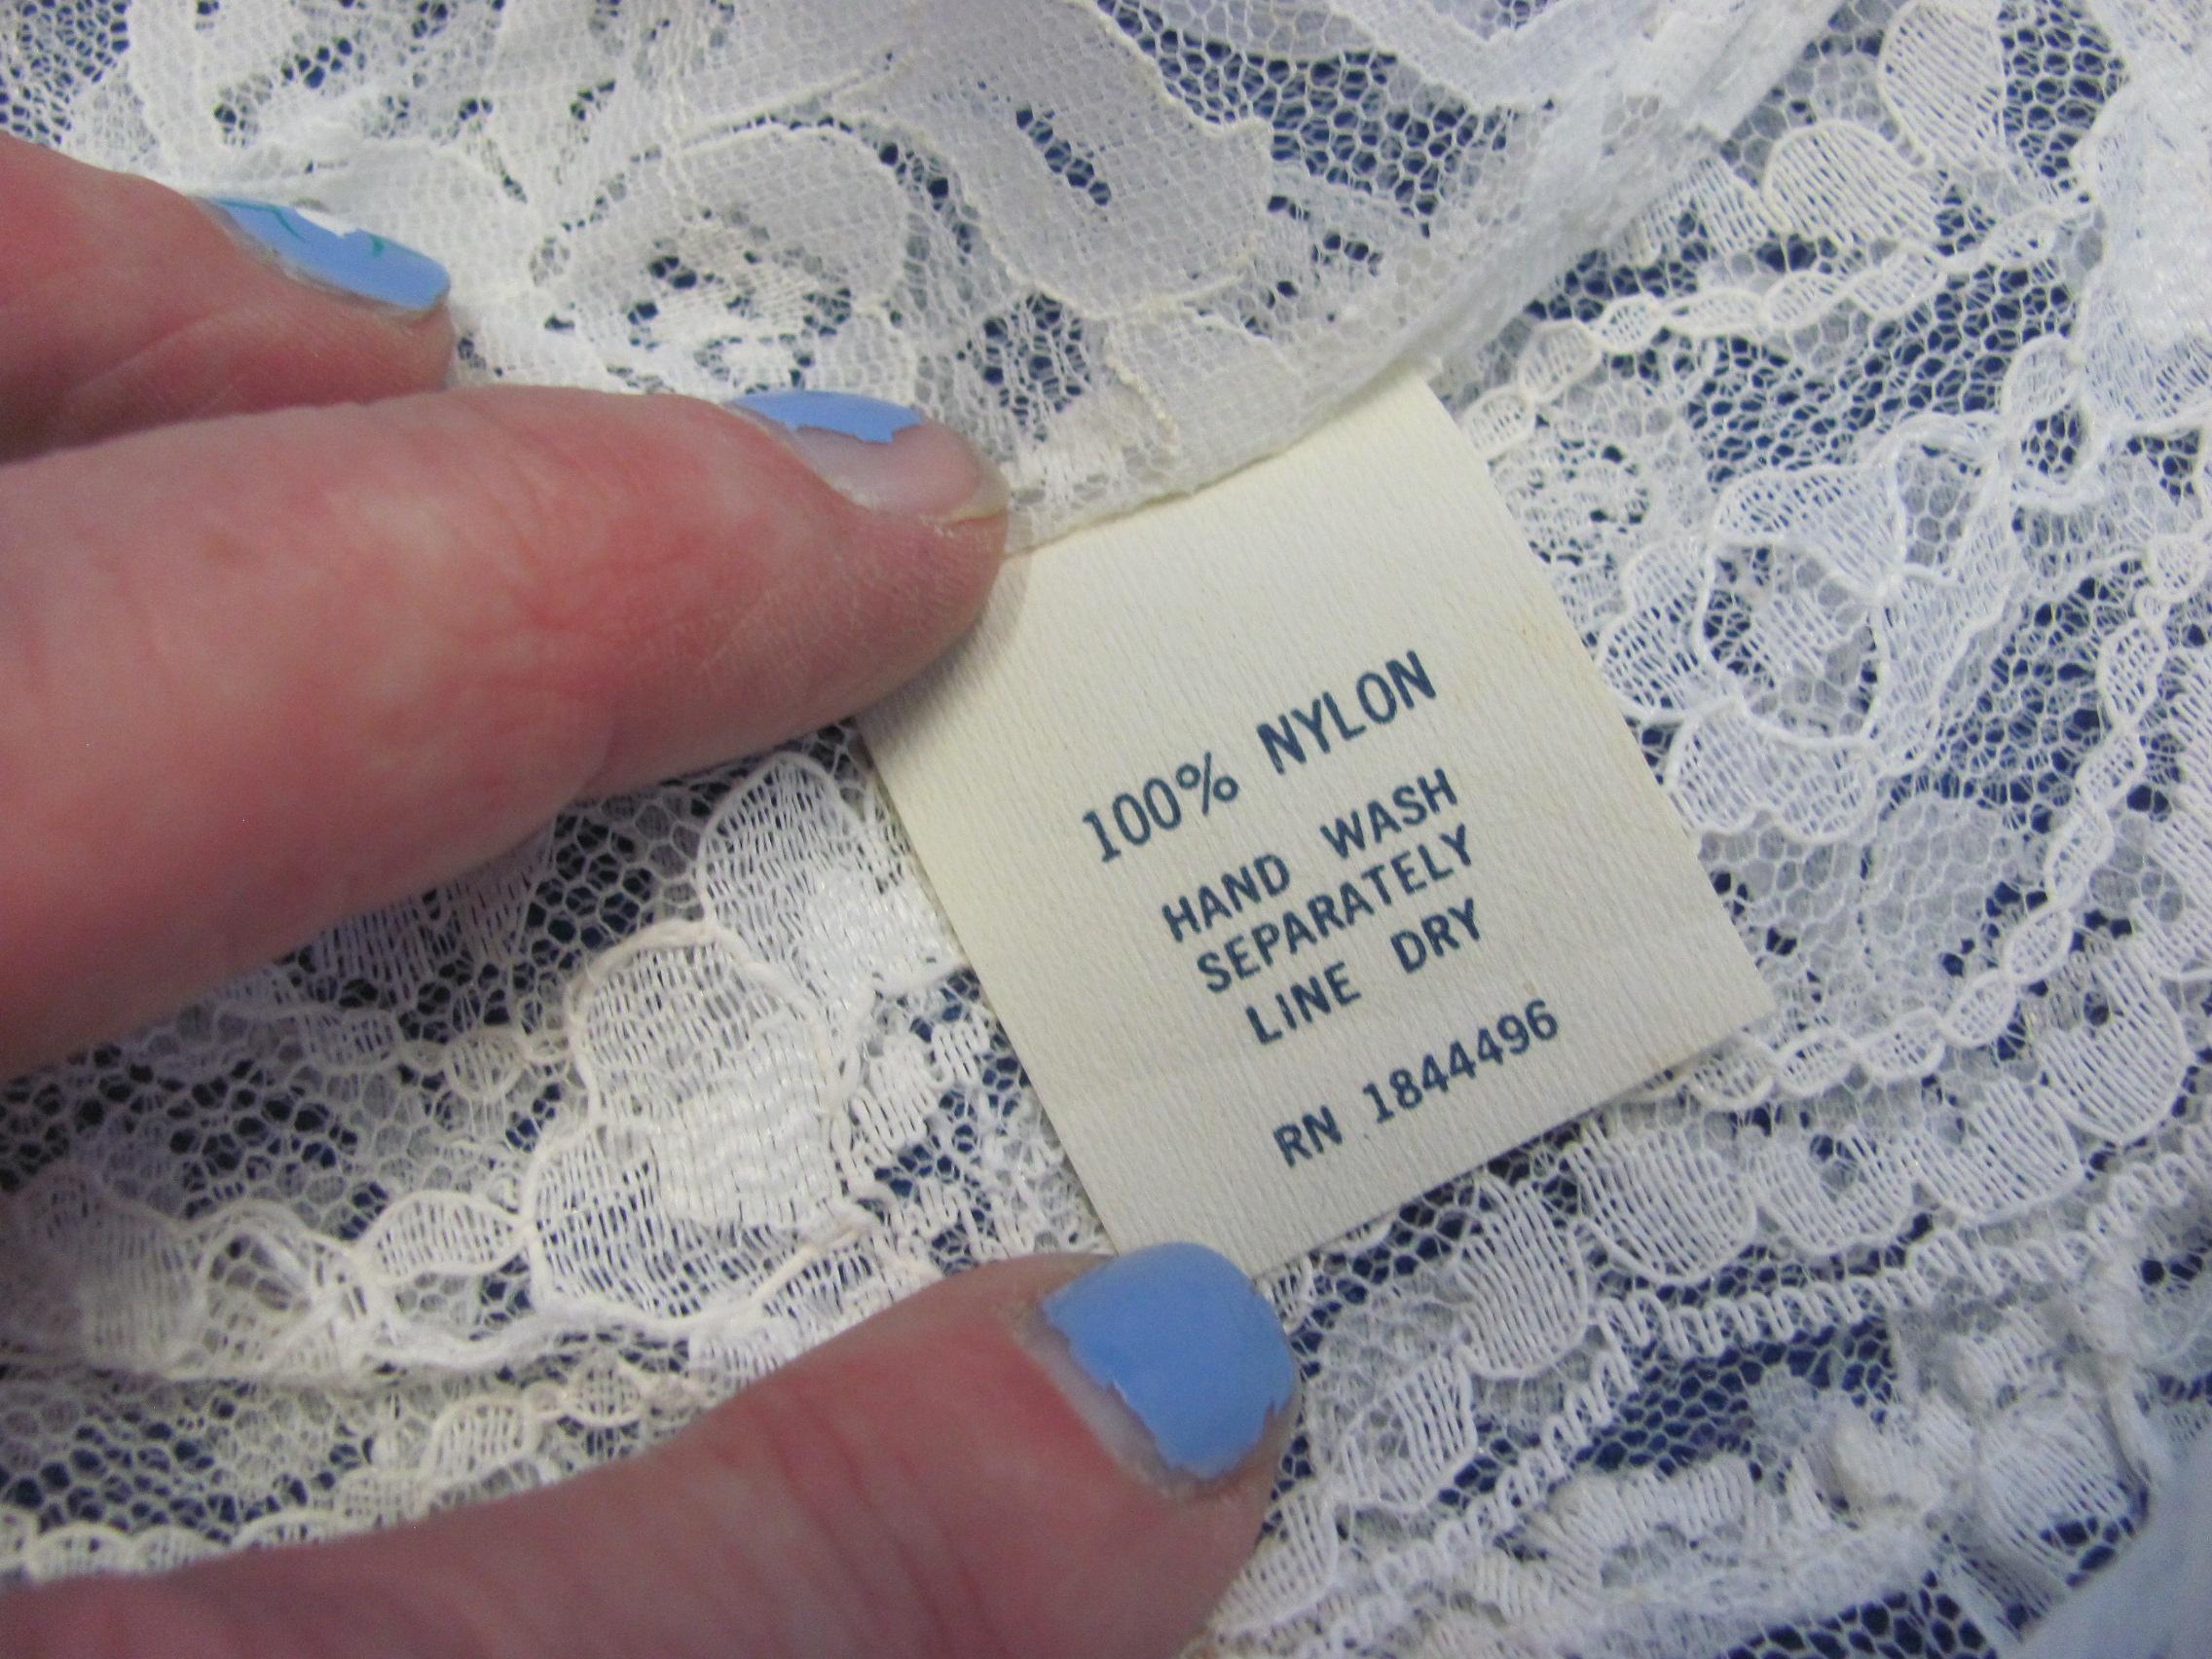 12 Vintage Half Aprons: Sheer – Crocheted – Gingham & more – 1 with Tiny Bible Charm